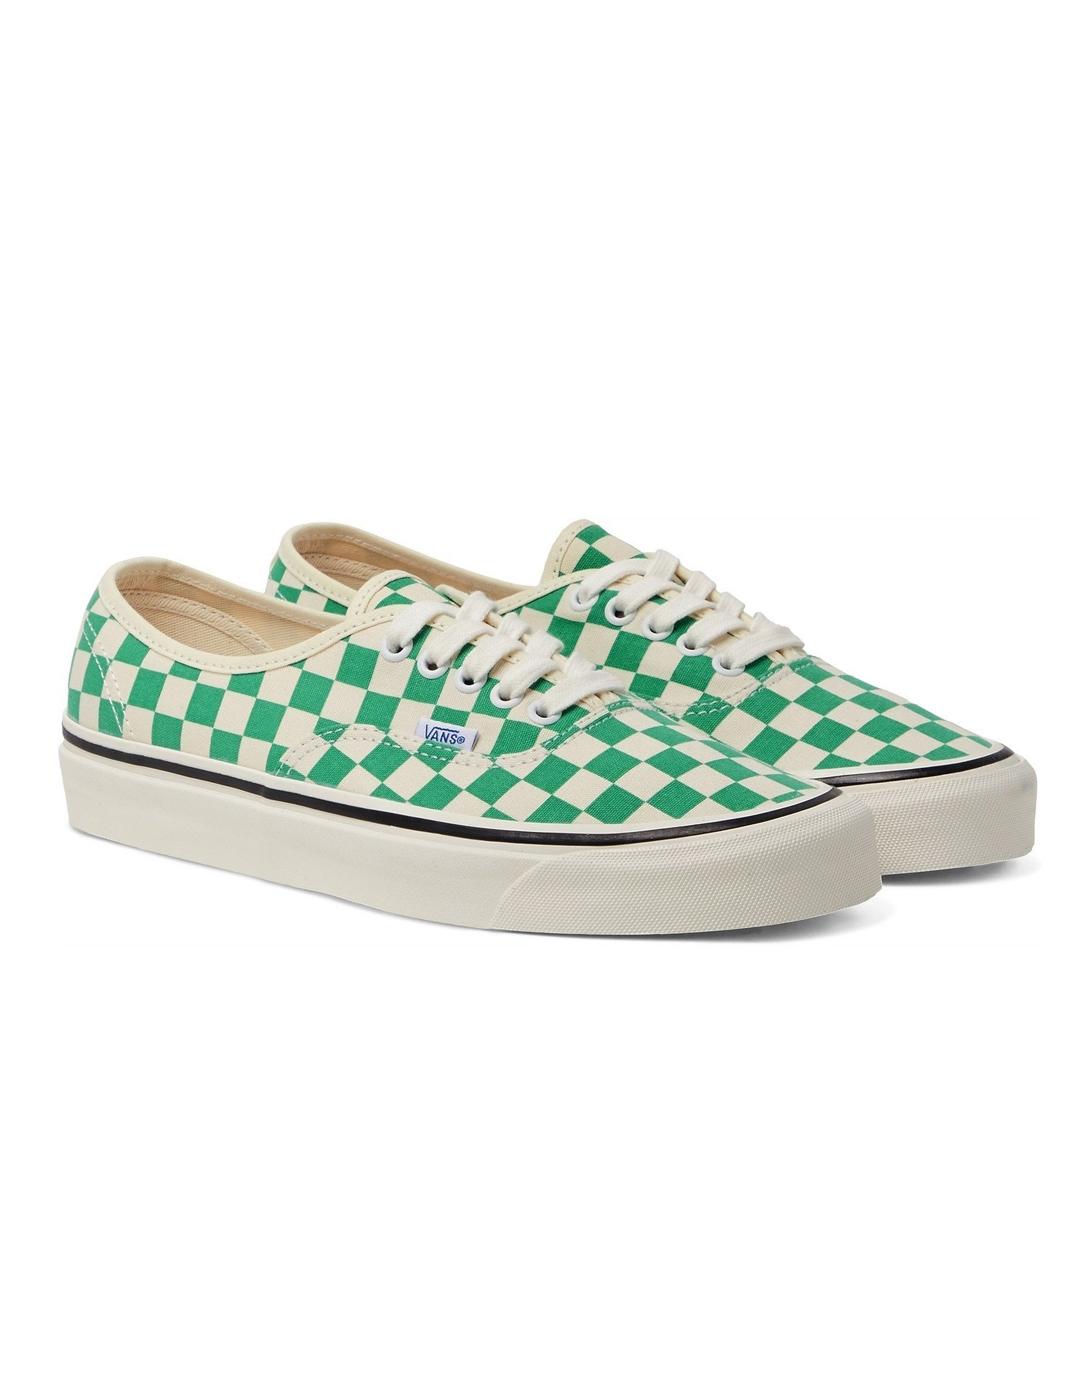 Zapatillas Vans Authentic 44 DX Checked Green